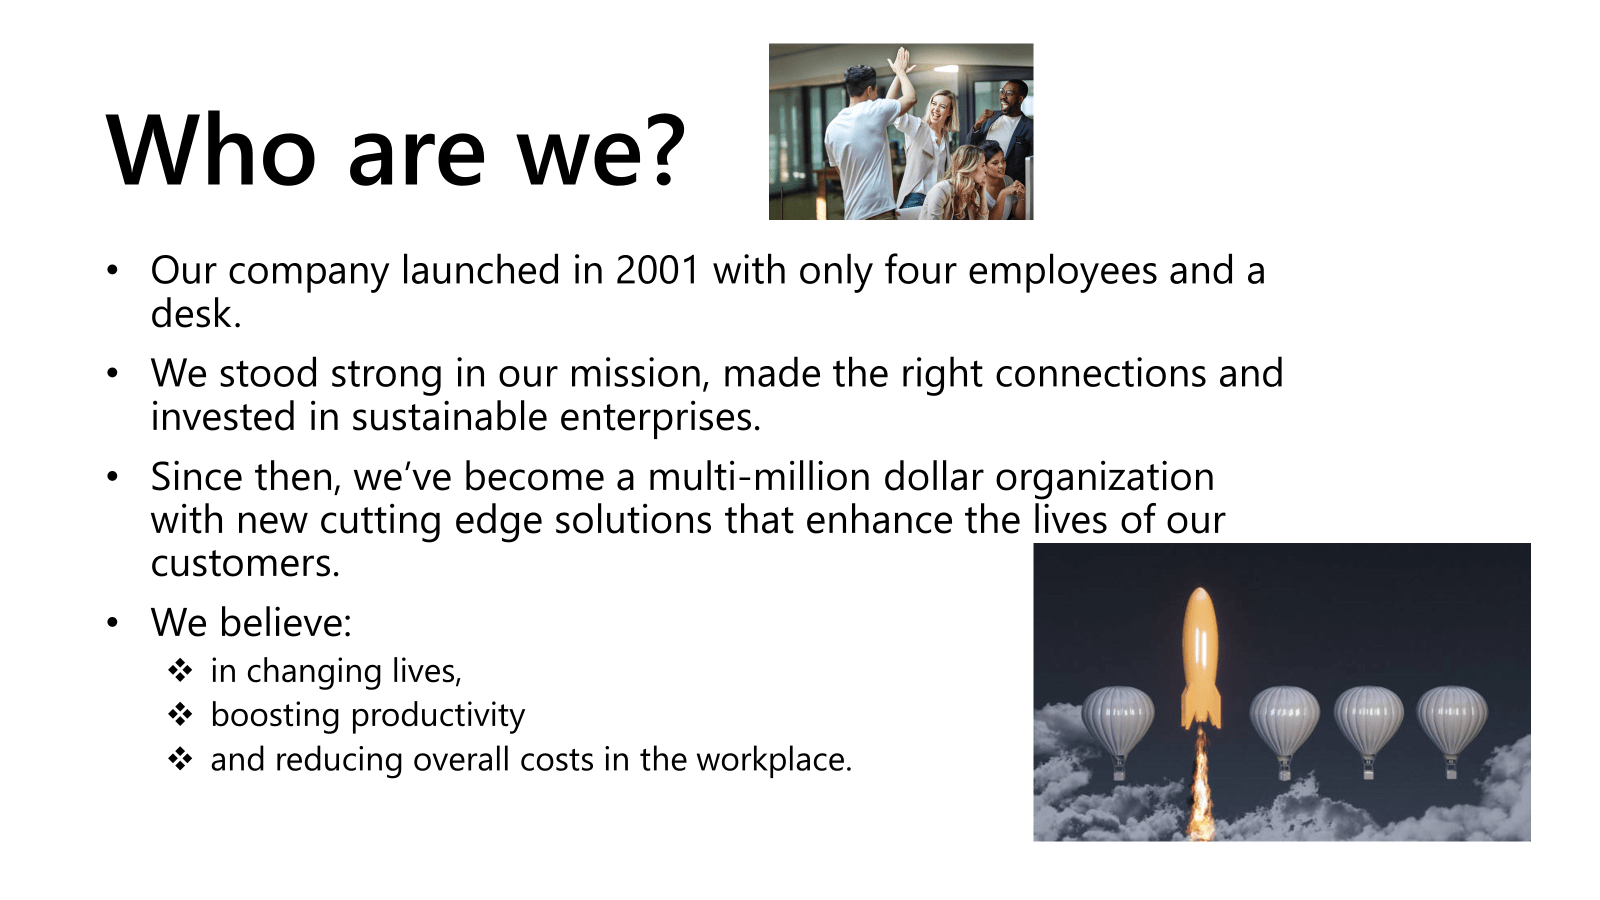 PowerPoint slide with a list of bullet points and images placed at random on the slide. The images show two people high fiving and a rocket launching. The title of the slide is 'Who are we?'